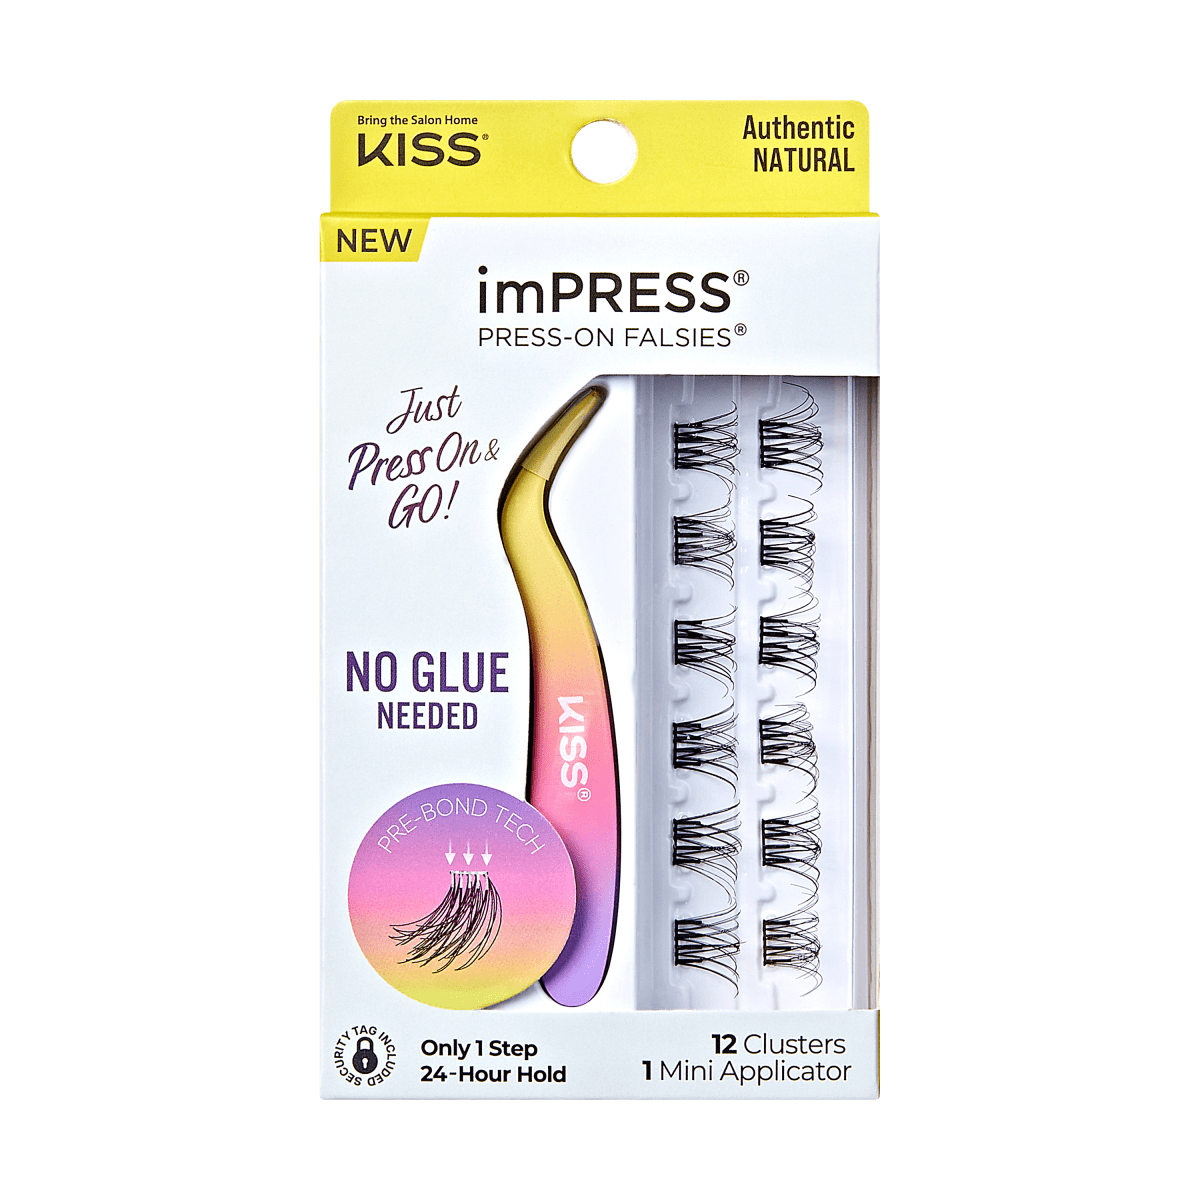 imPRESS Press-On Falsies Minipack, 12 Clusters + Applicator - Authentic